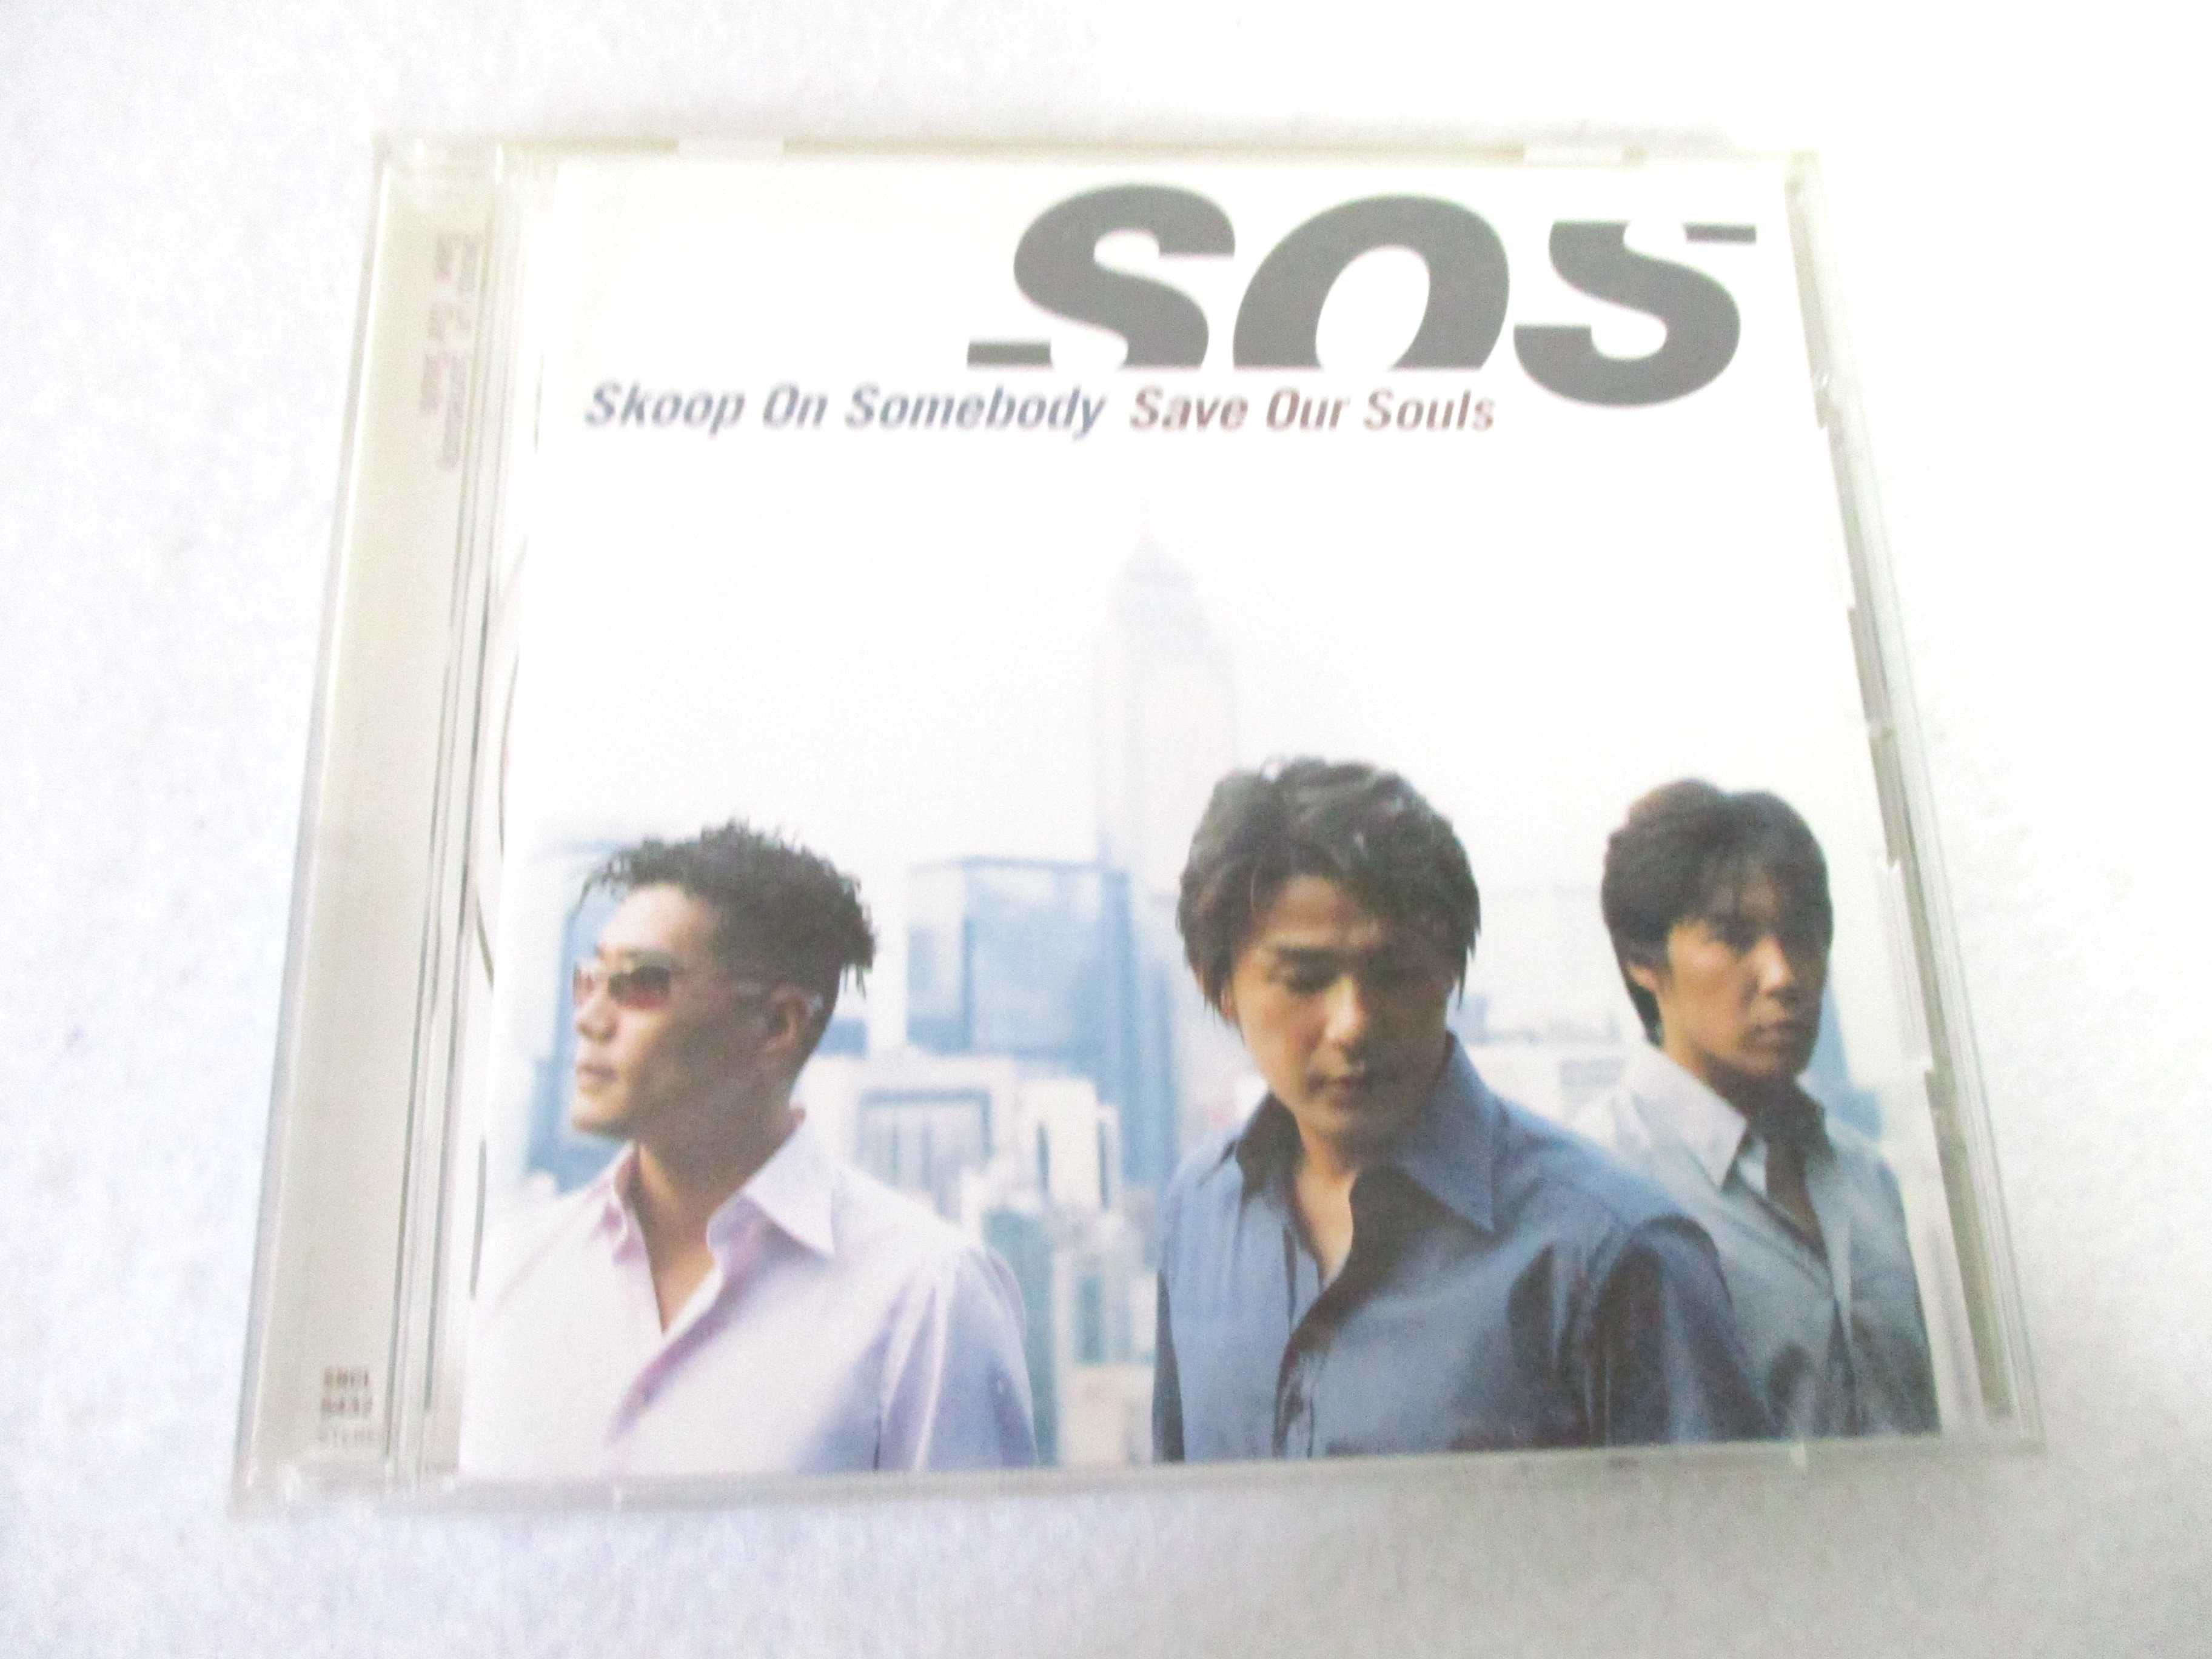 AC02874 【中古】 【CD】 Save Our Souls/Skoop On Somebody